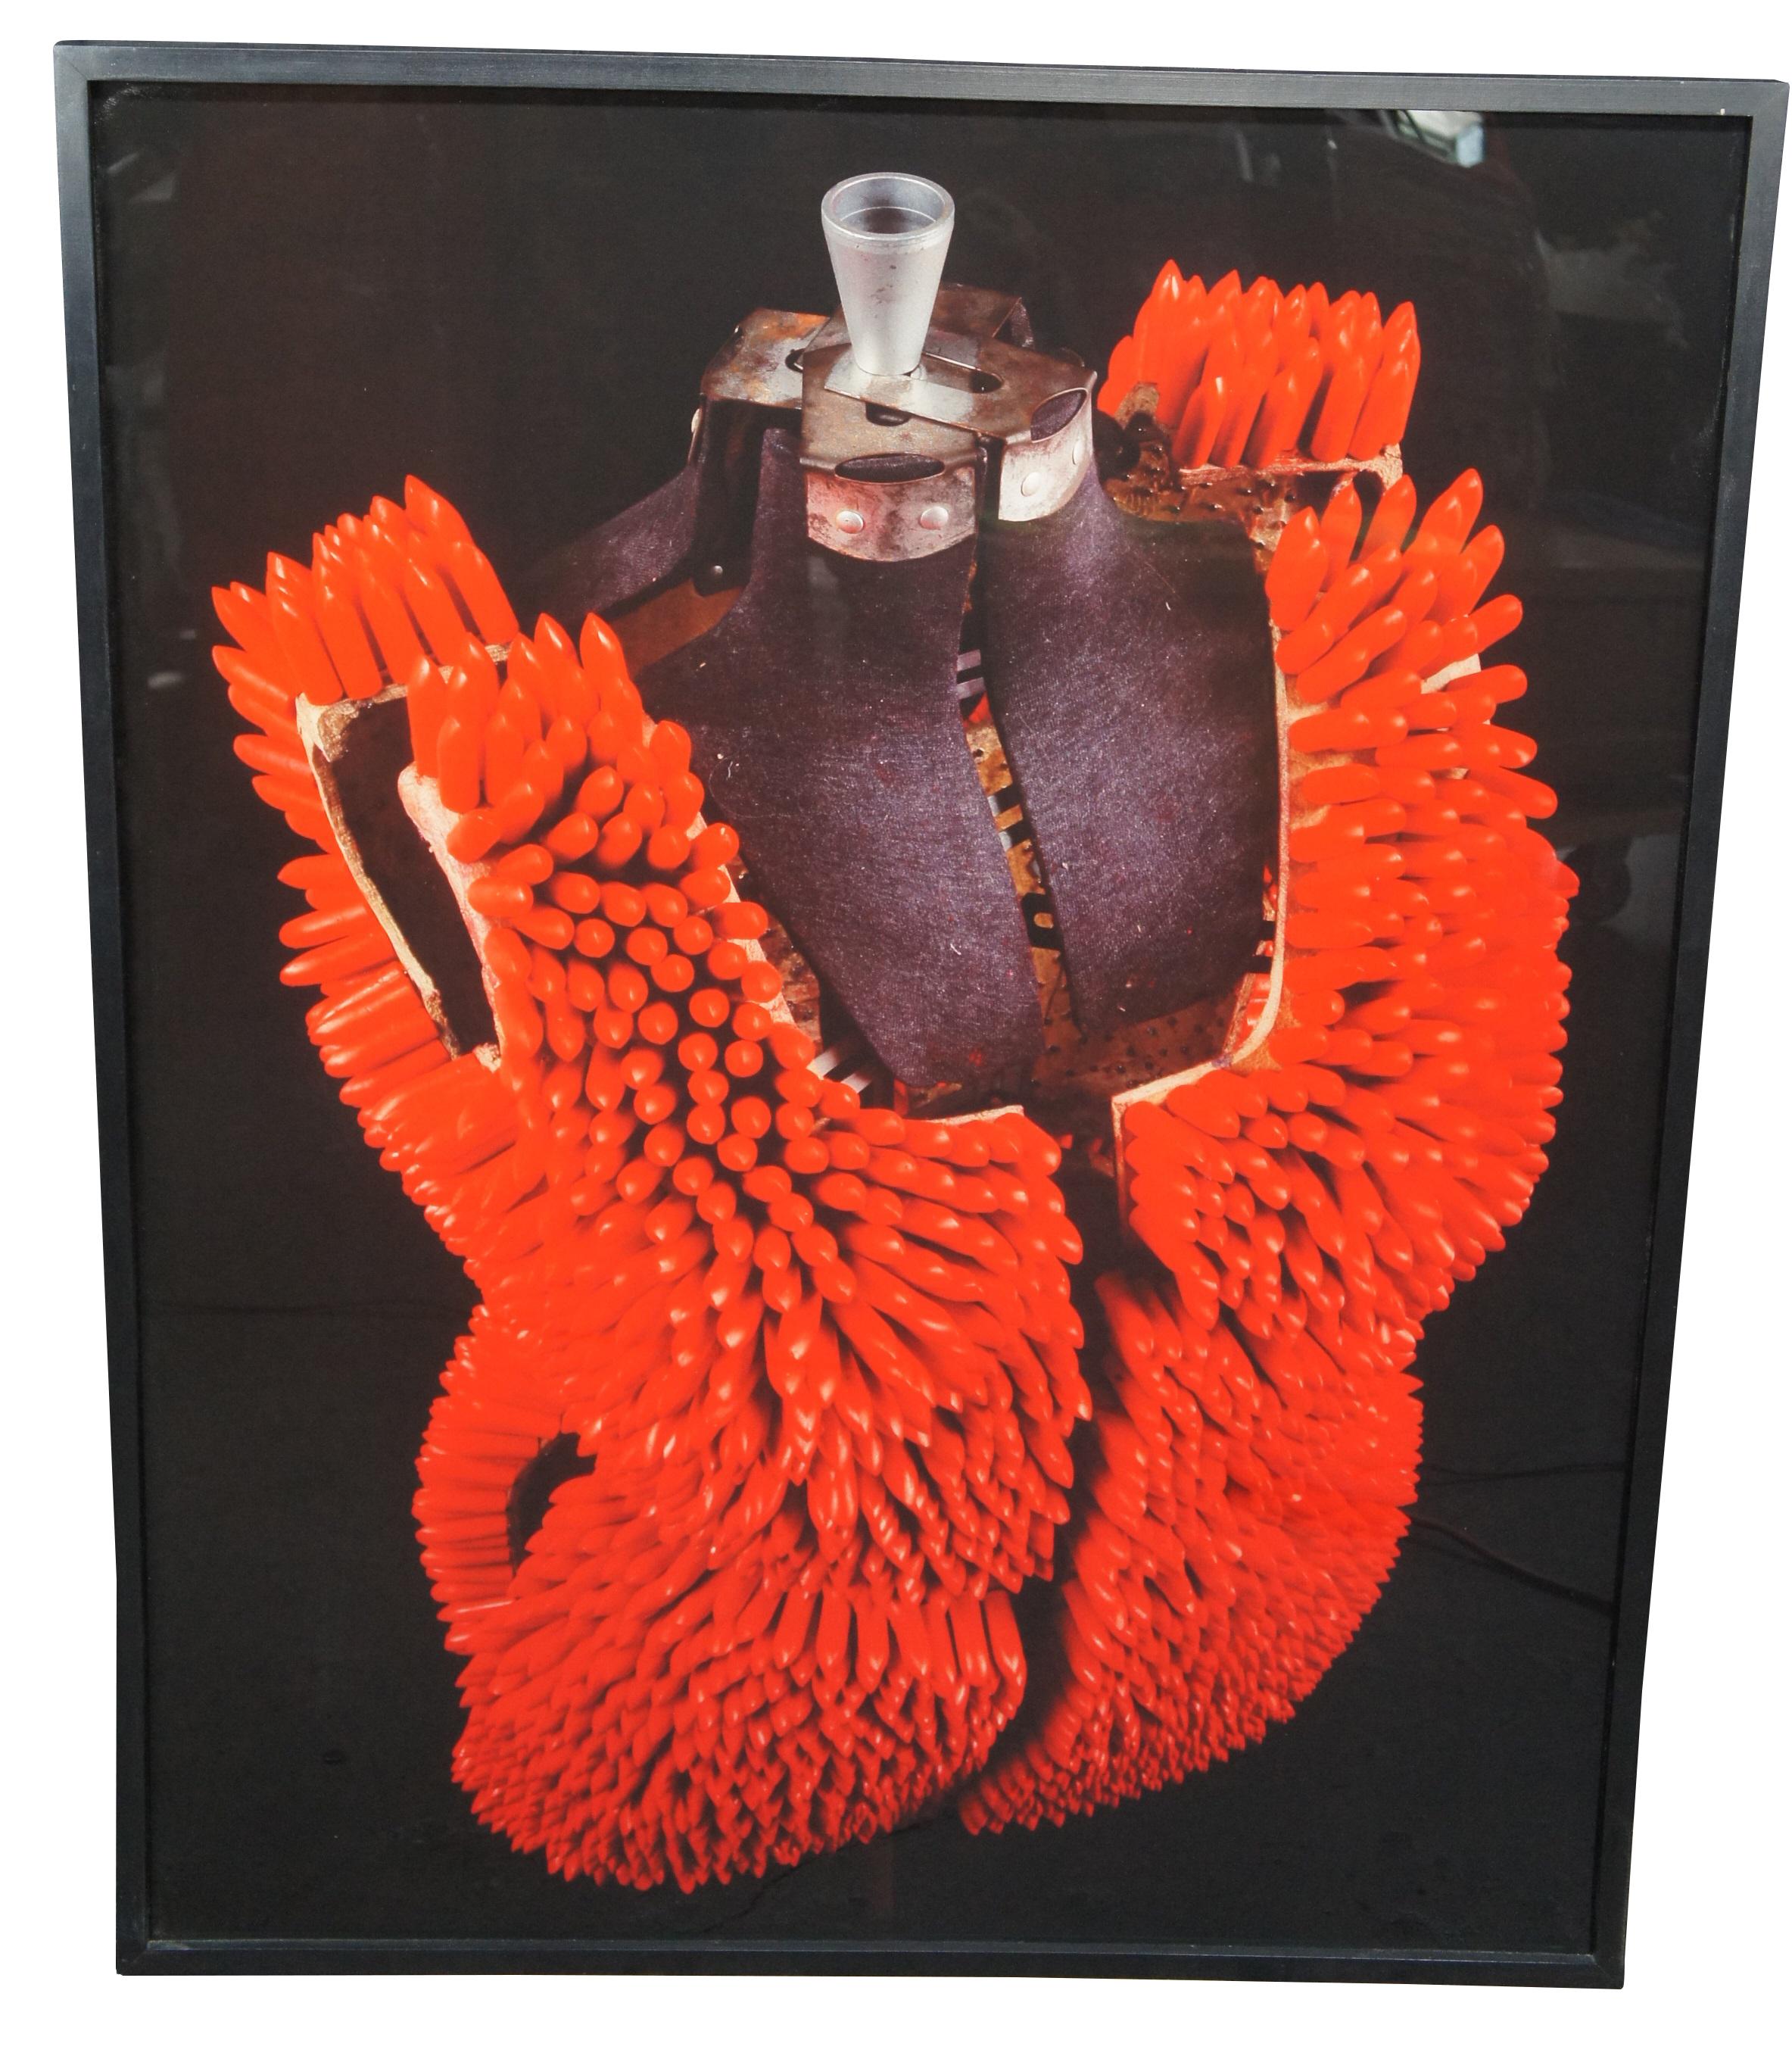 Vintage 1993 Lipstick Dress 1, 2 & 3 by Janet Biggs.  Features a trio of cibachrome photograph panels depicting lipstick armour on a mannequin form.

Janet Biggs, American, b. 1959.
Janet Biggs is an American artist, known for her work in video,